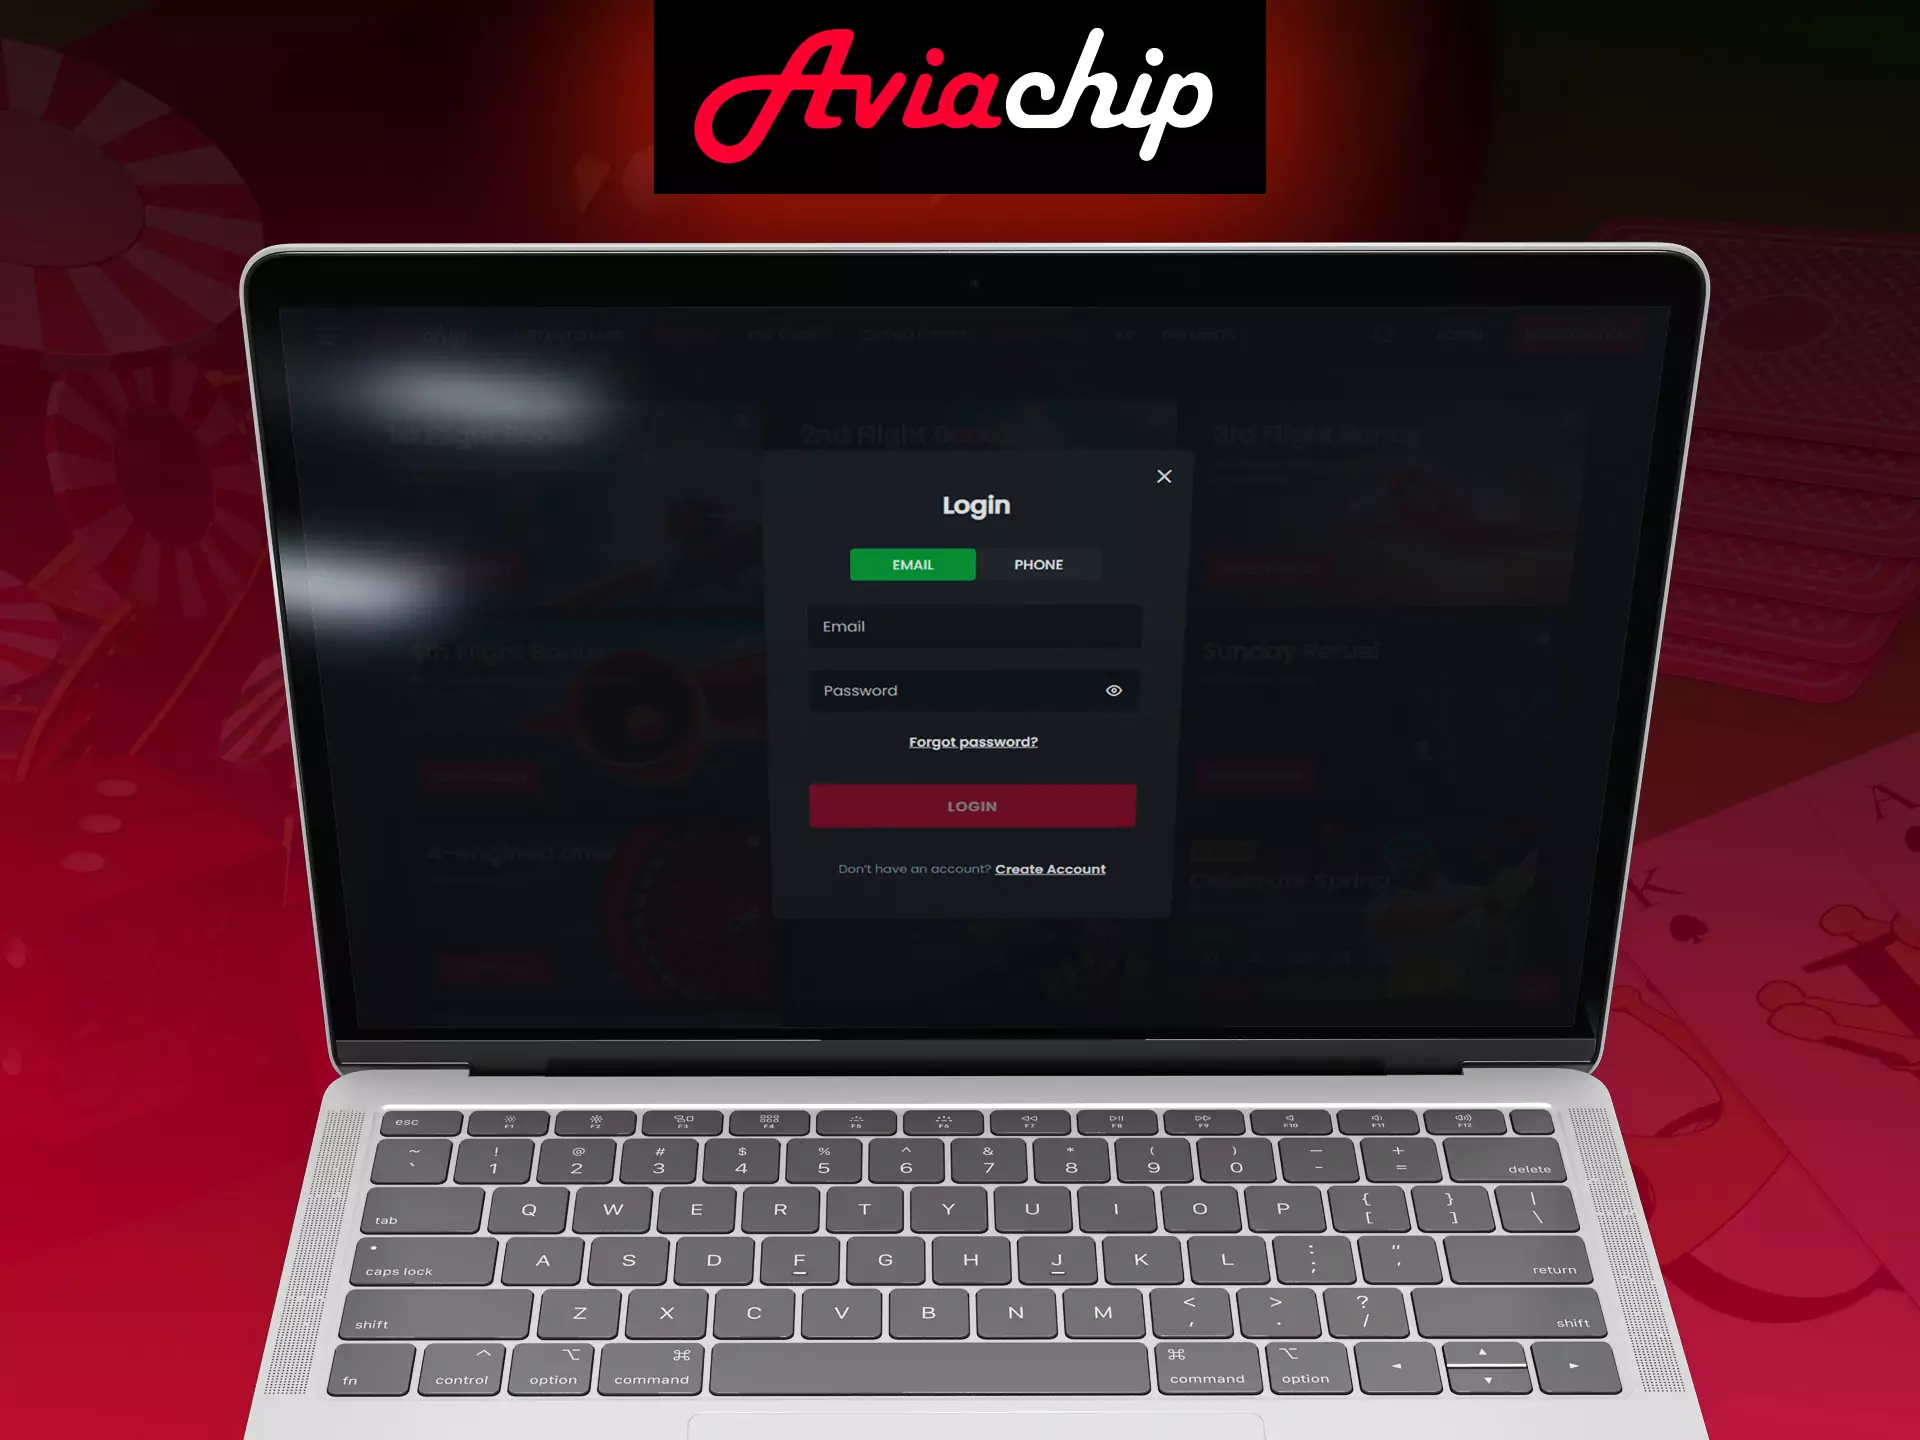 Log in to your Aviachip account to place bets and get bonuses.